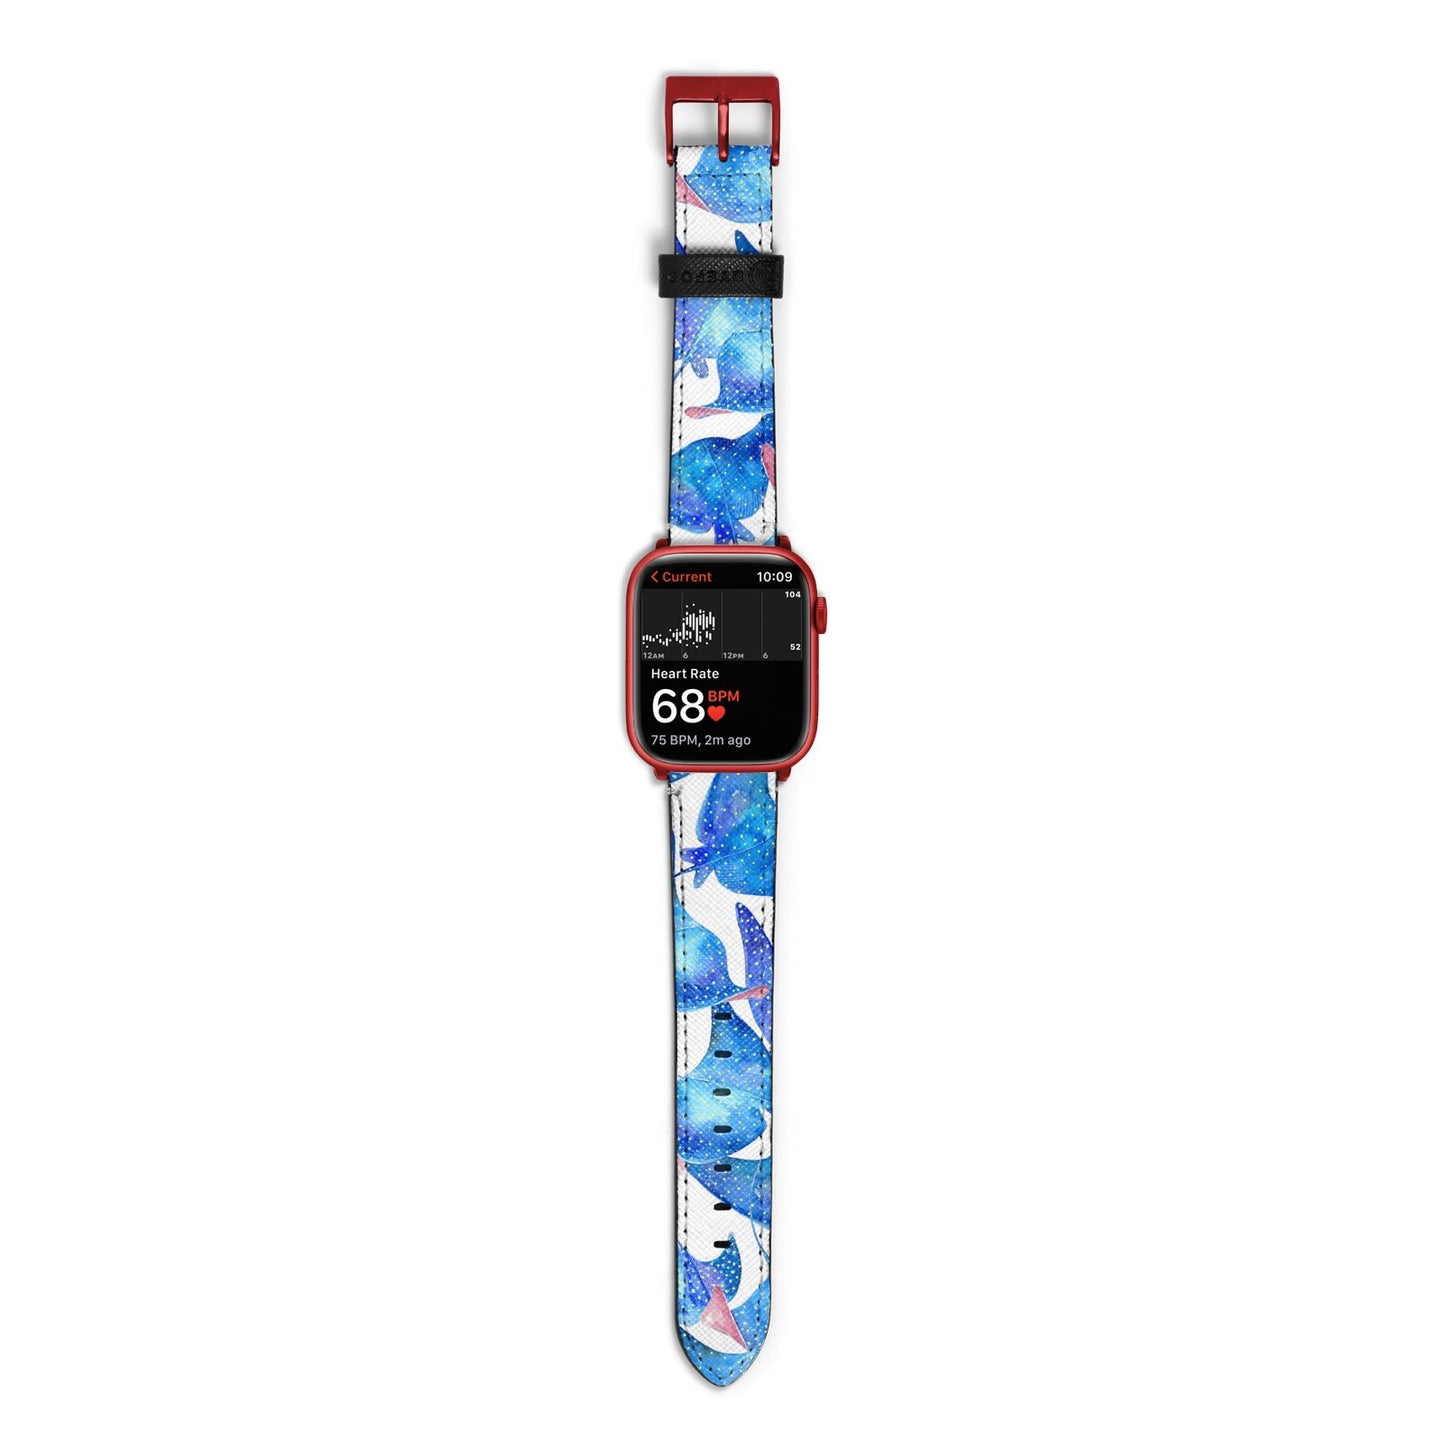 Devil Fish Apple Watch Strap Size 38mm with Red Hardware